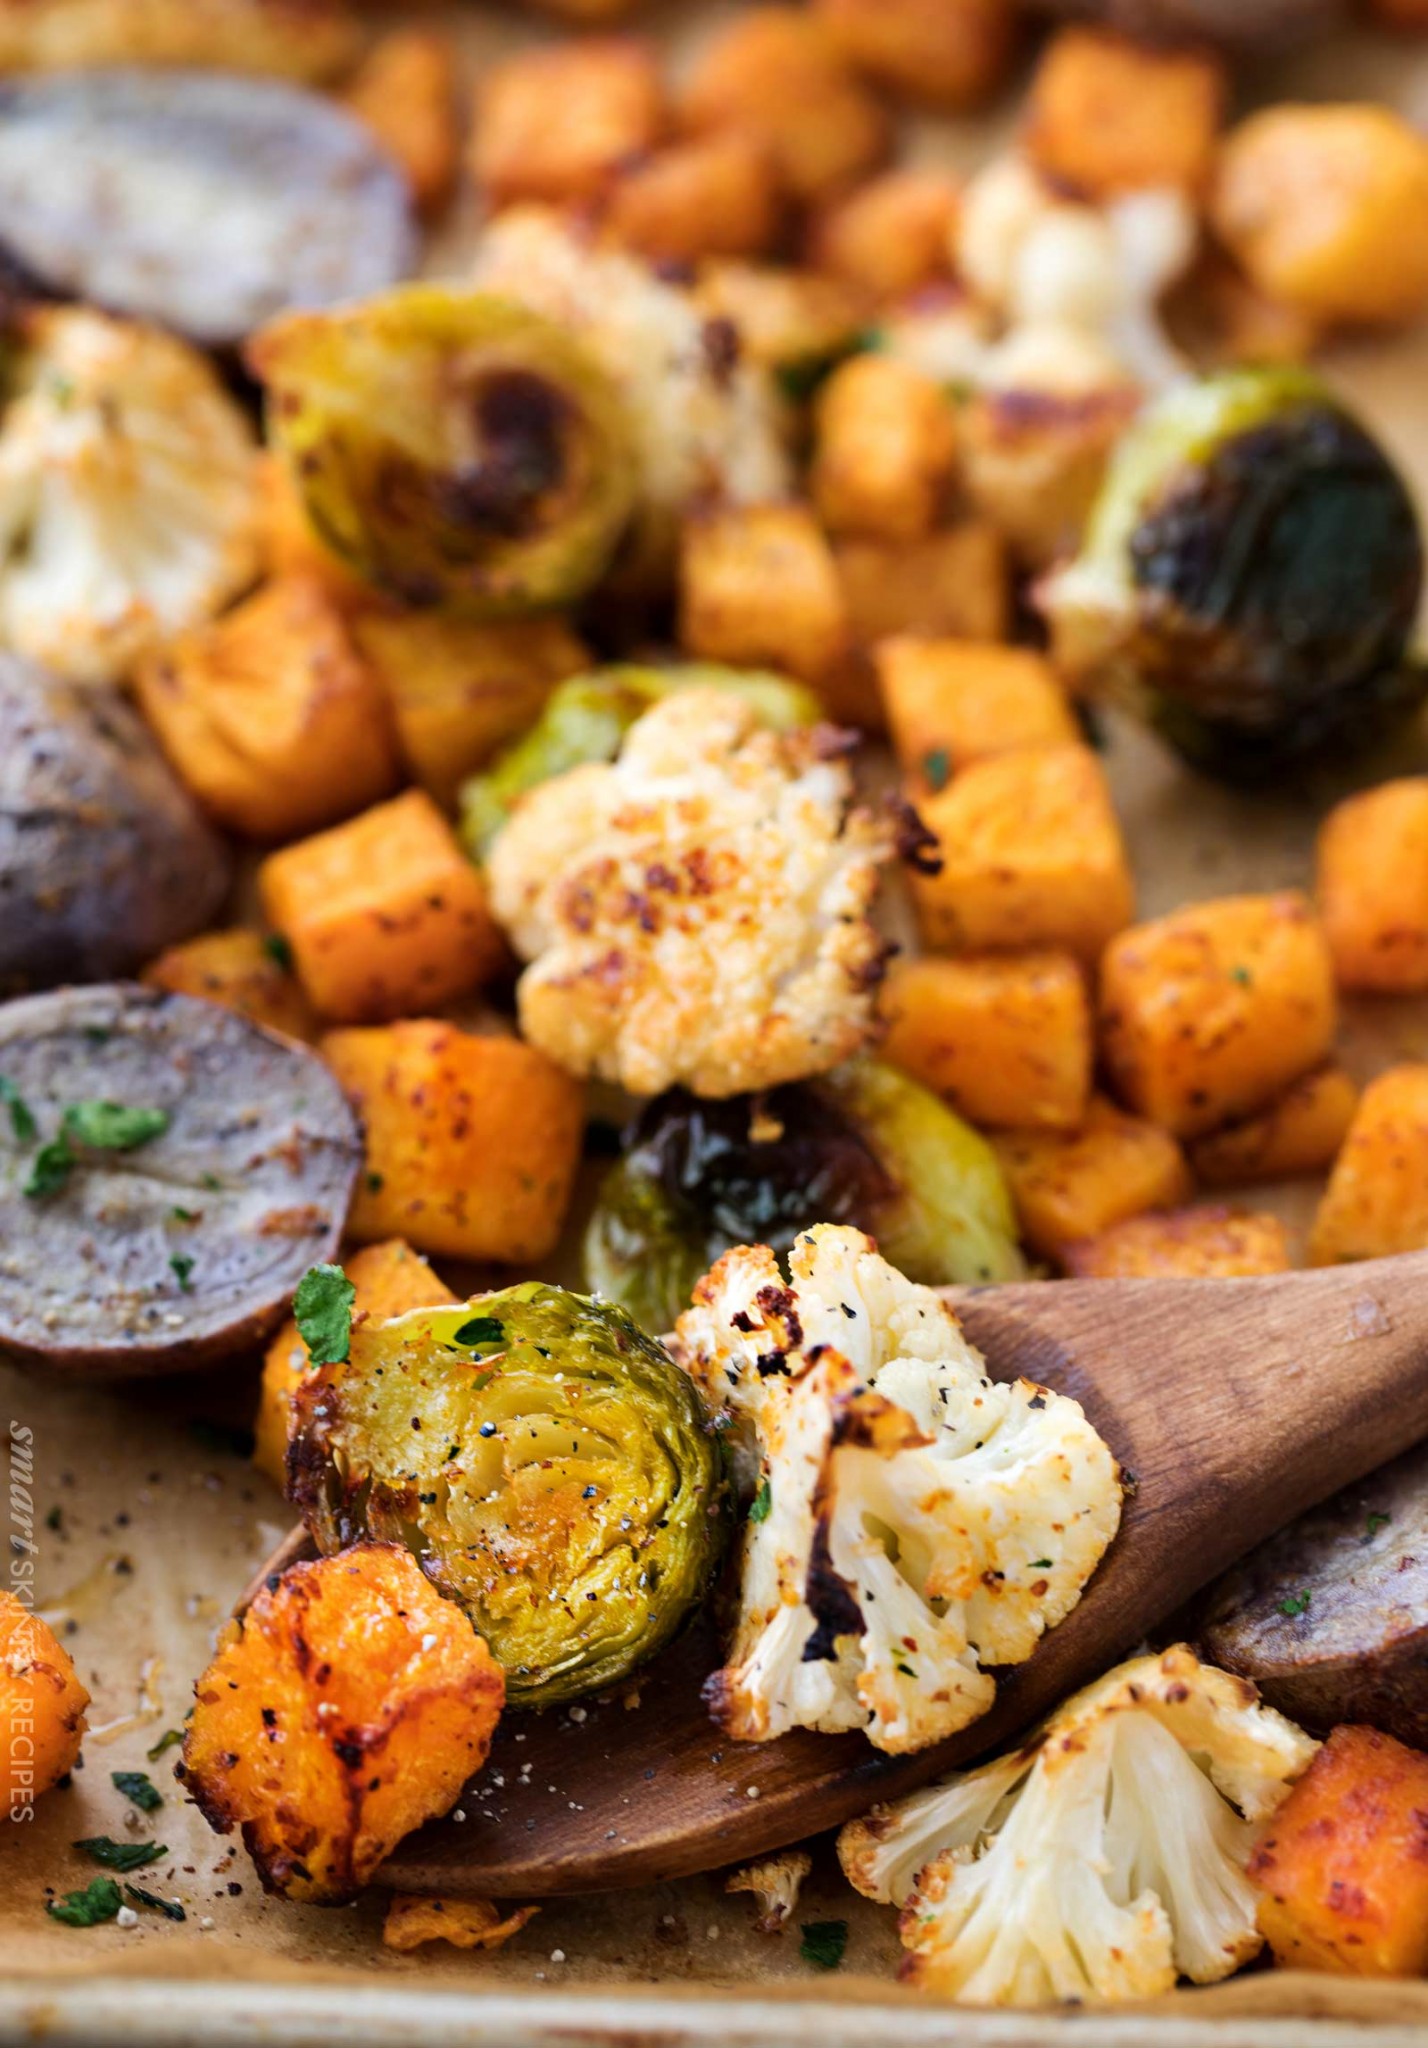 Sheet Pan Oven Roasted Vegetables - The Chunky Chef